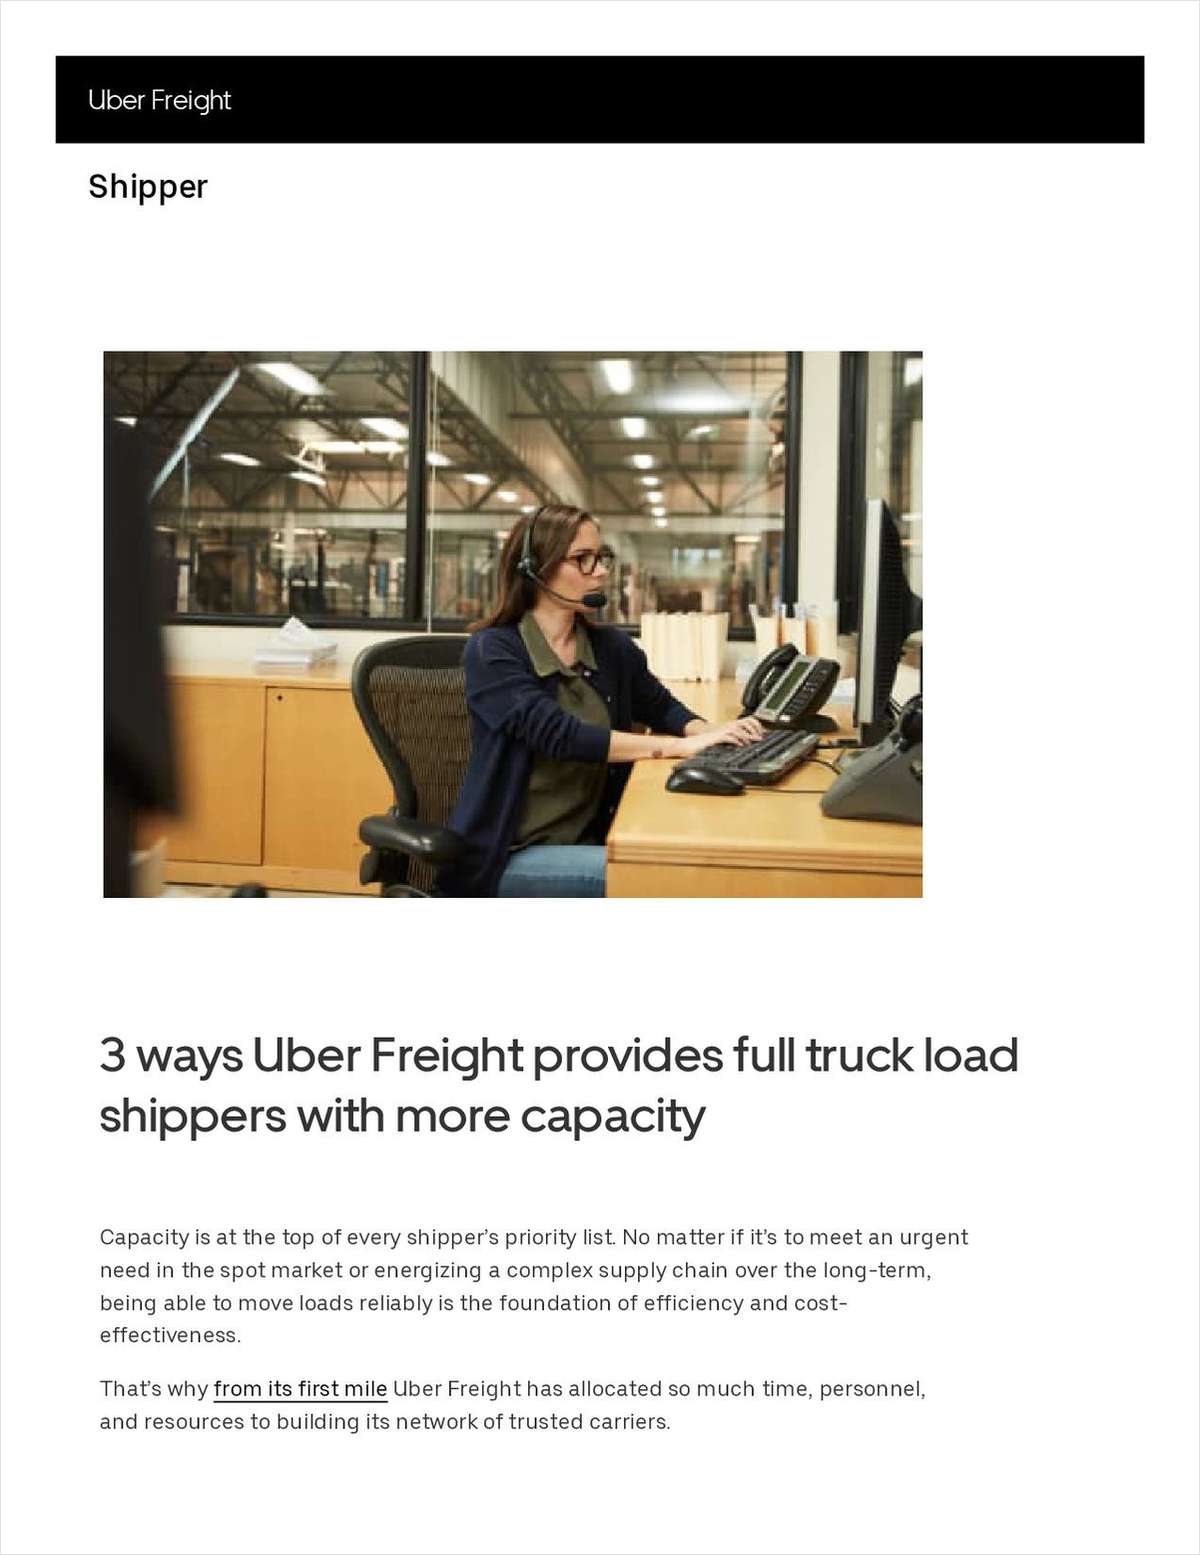 3 Ways Uber Freight Provides Full Truckload Shippers With More Capacity